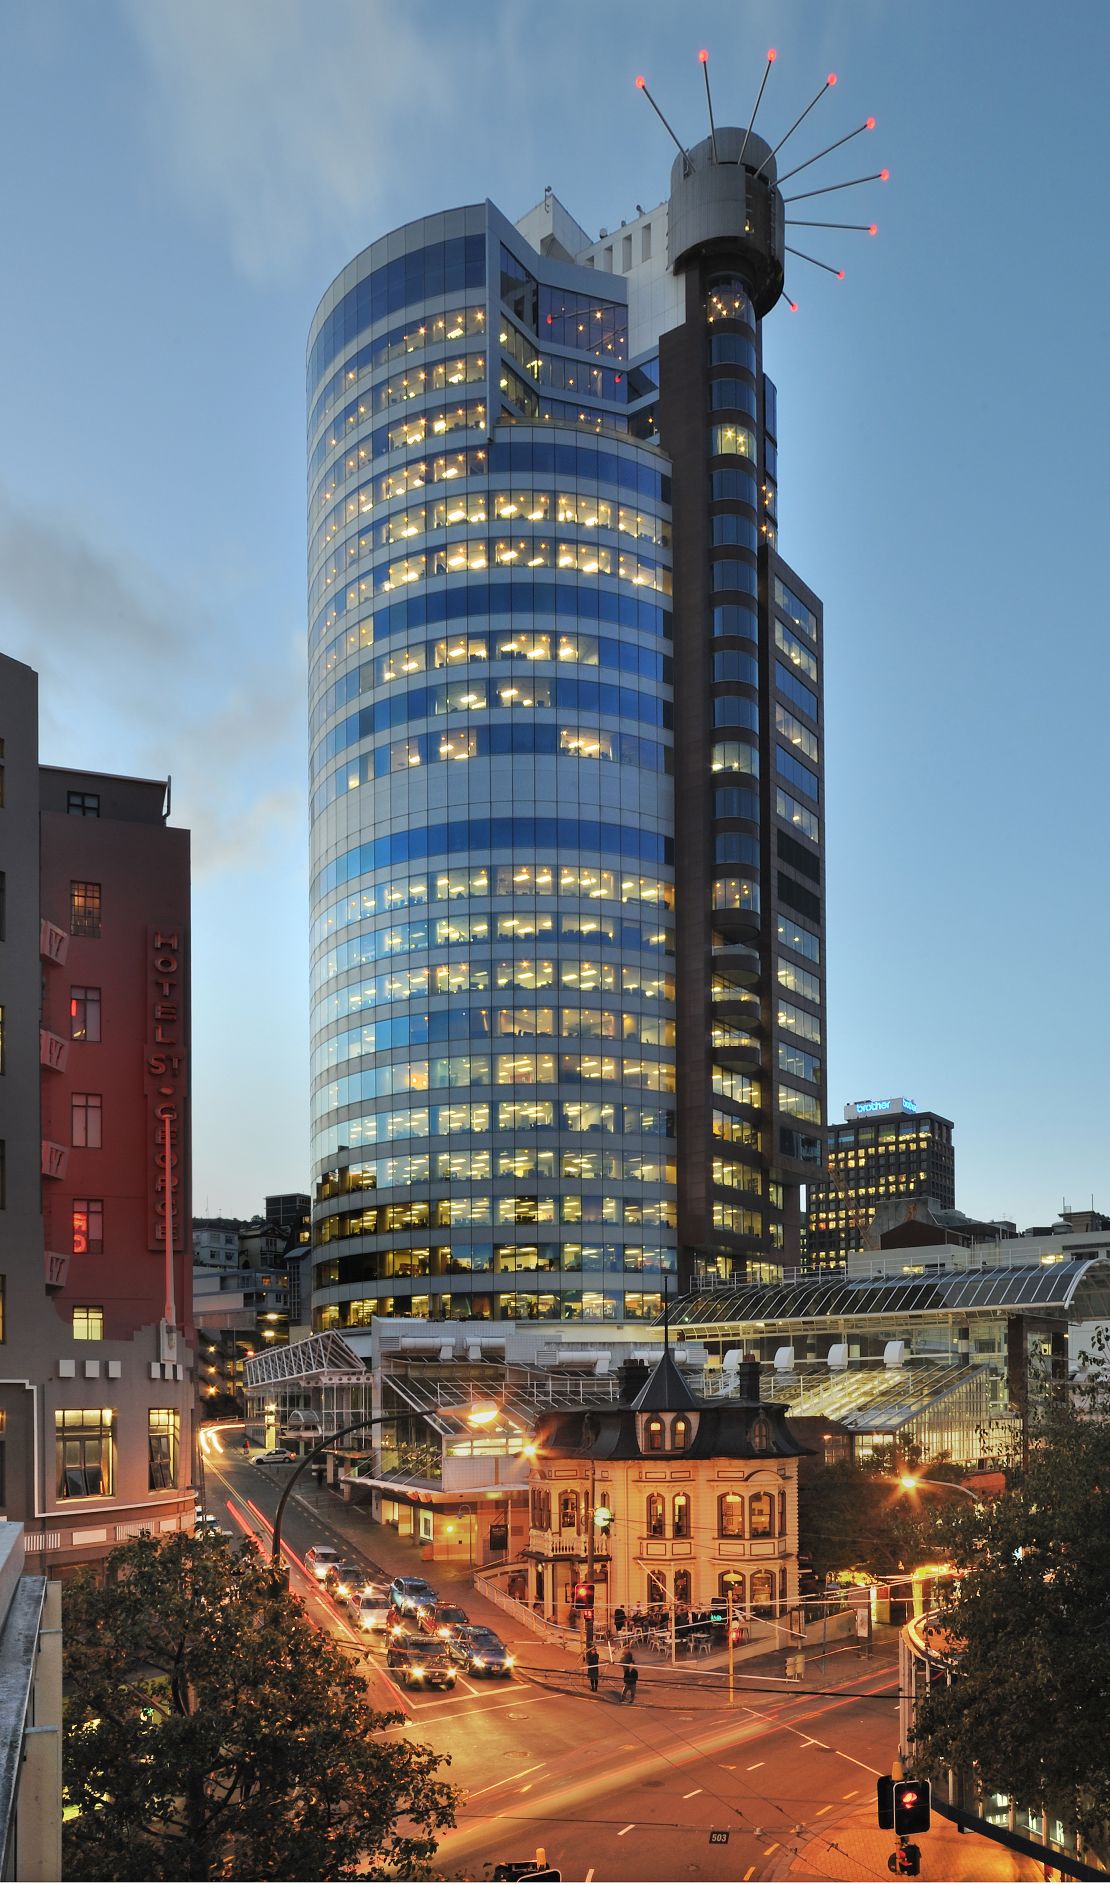 The Majestic Centre in Wellington, New Zealand